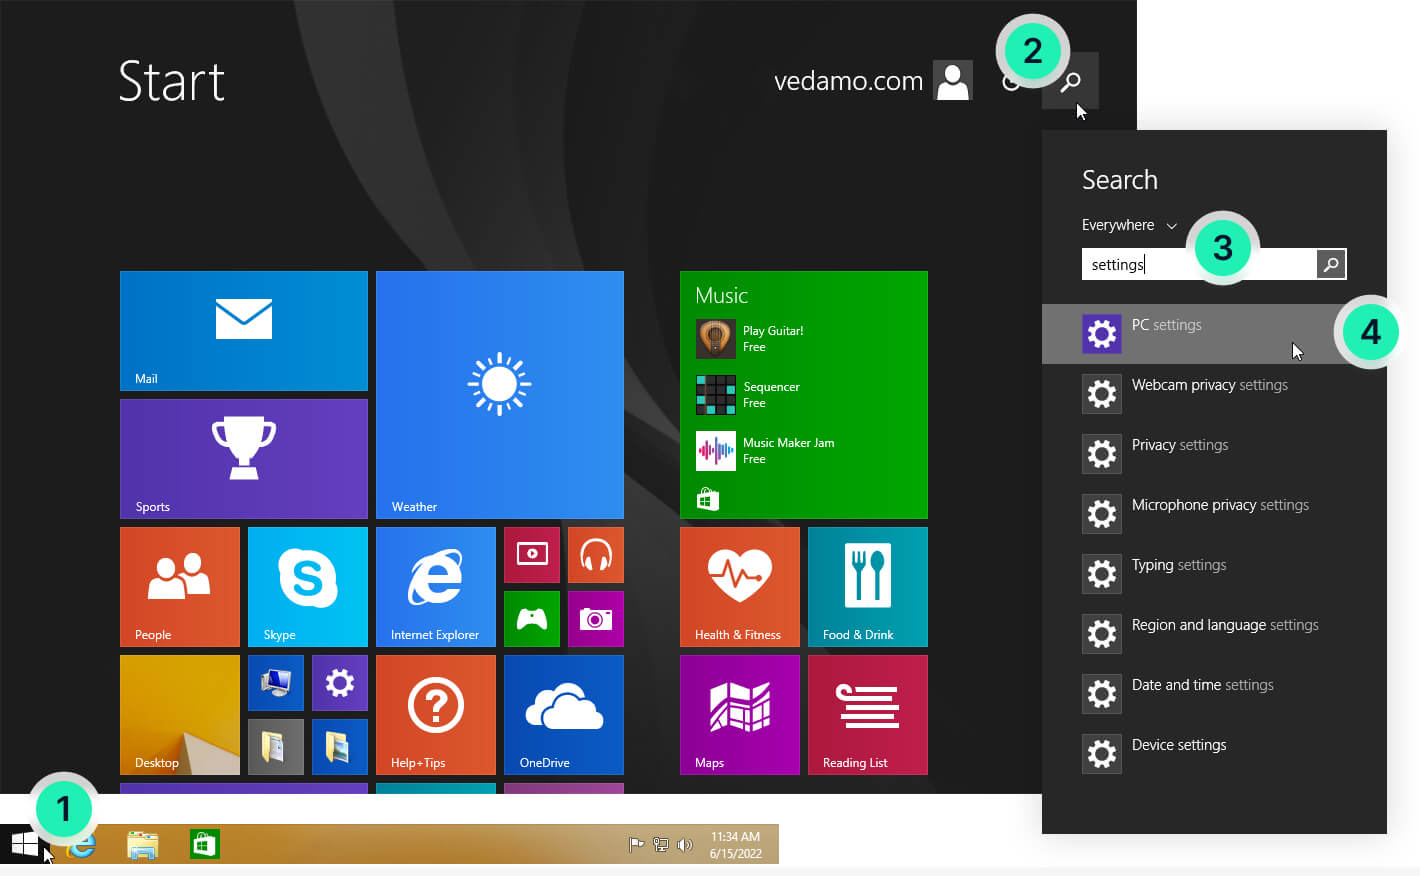 Blocked camera and microphone from Windows 8 OS: Windows 8 search menu